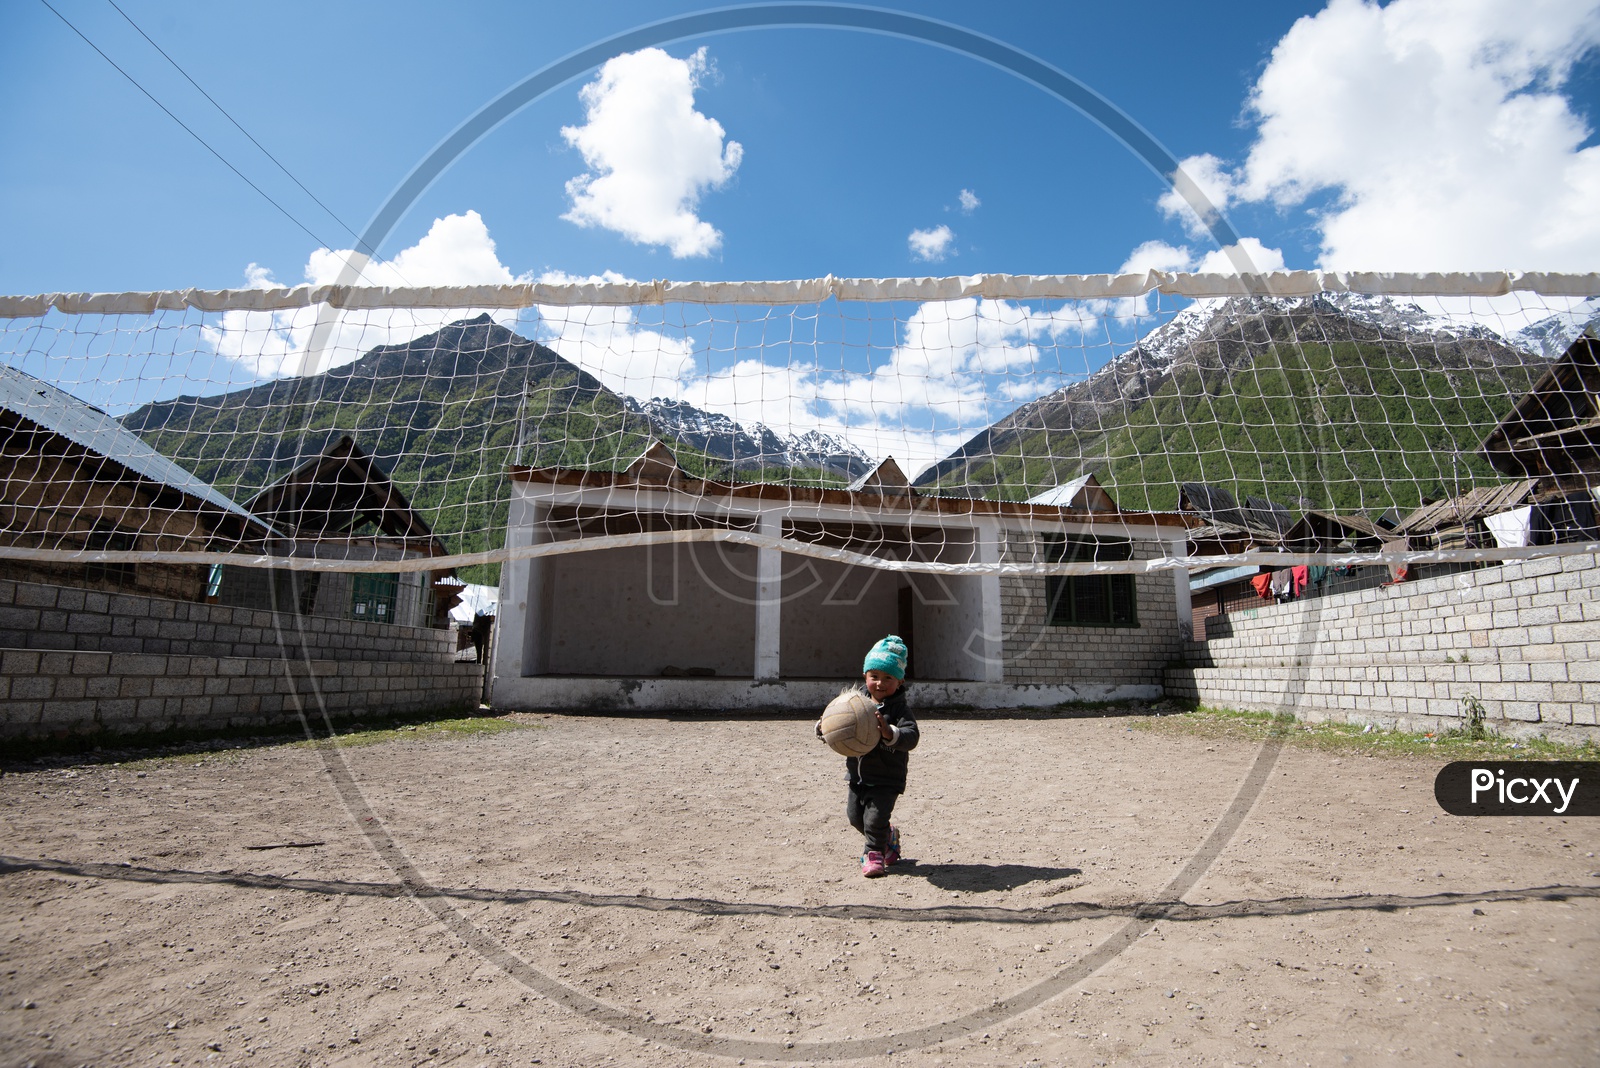 Child in Spiti Valley Playing with Ball in Volleyball Court